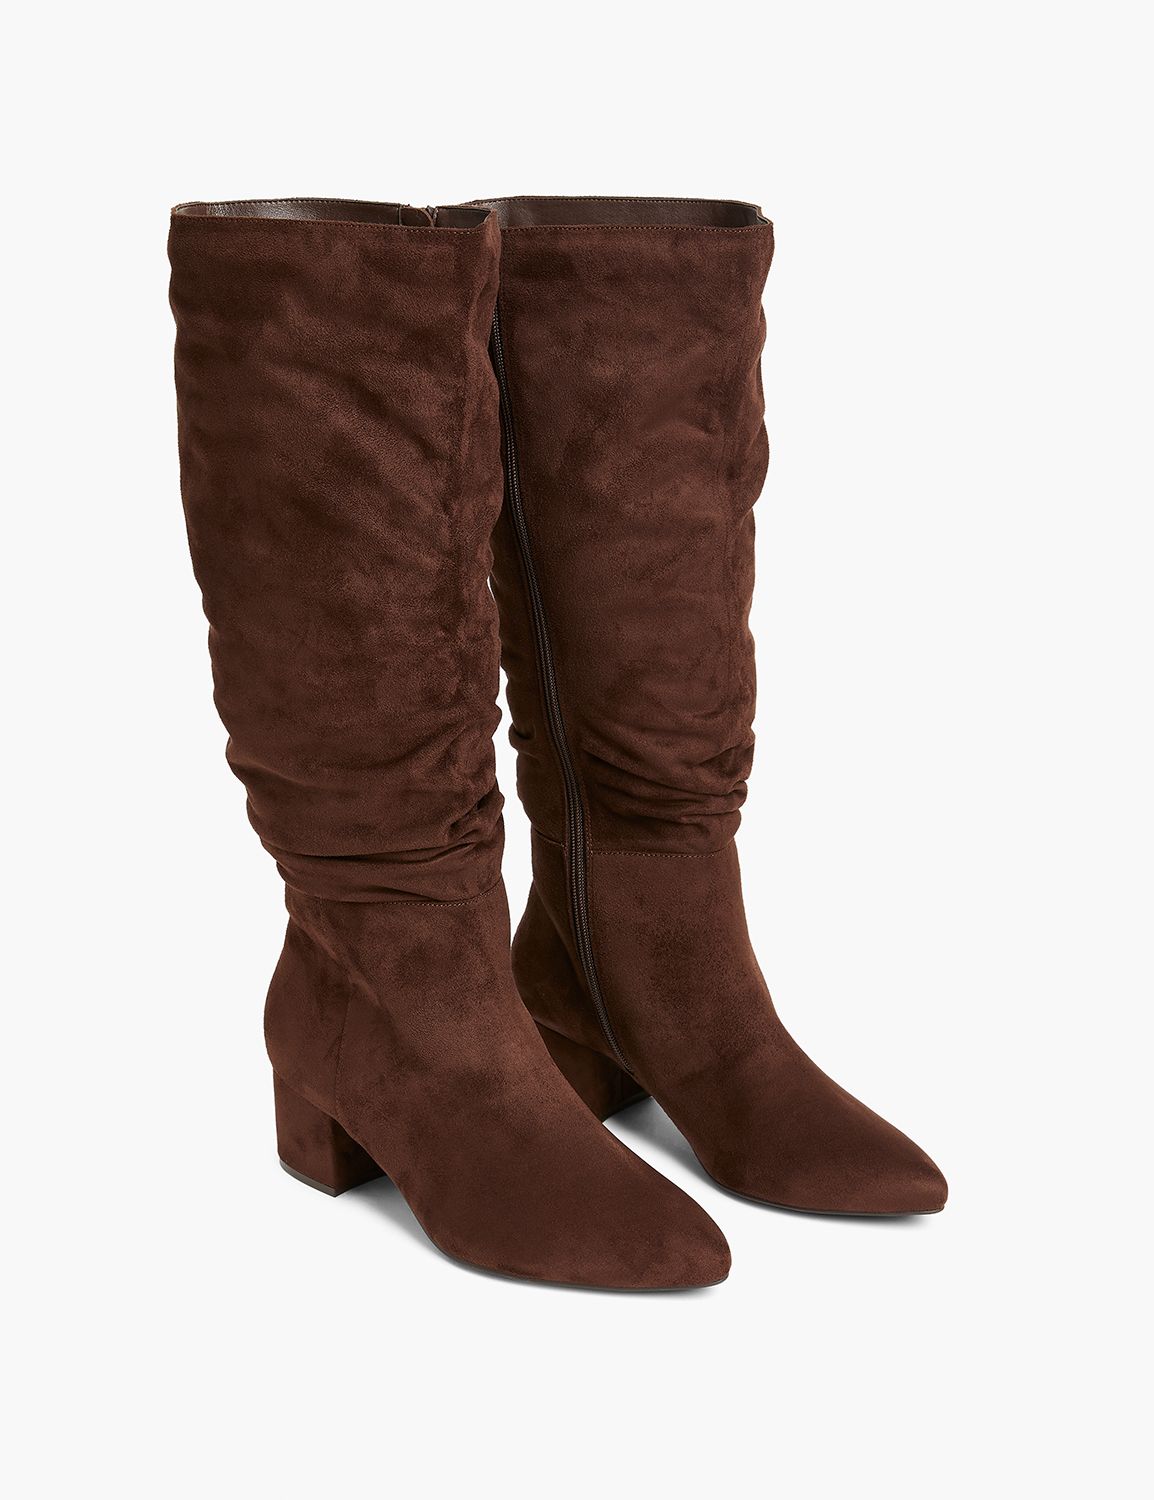 SLOUCHY TALL BOOT | LaneBryant